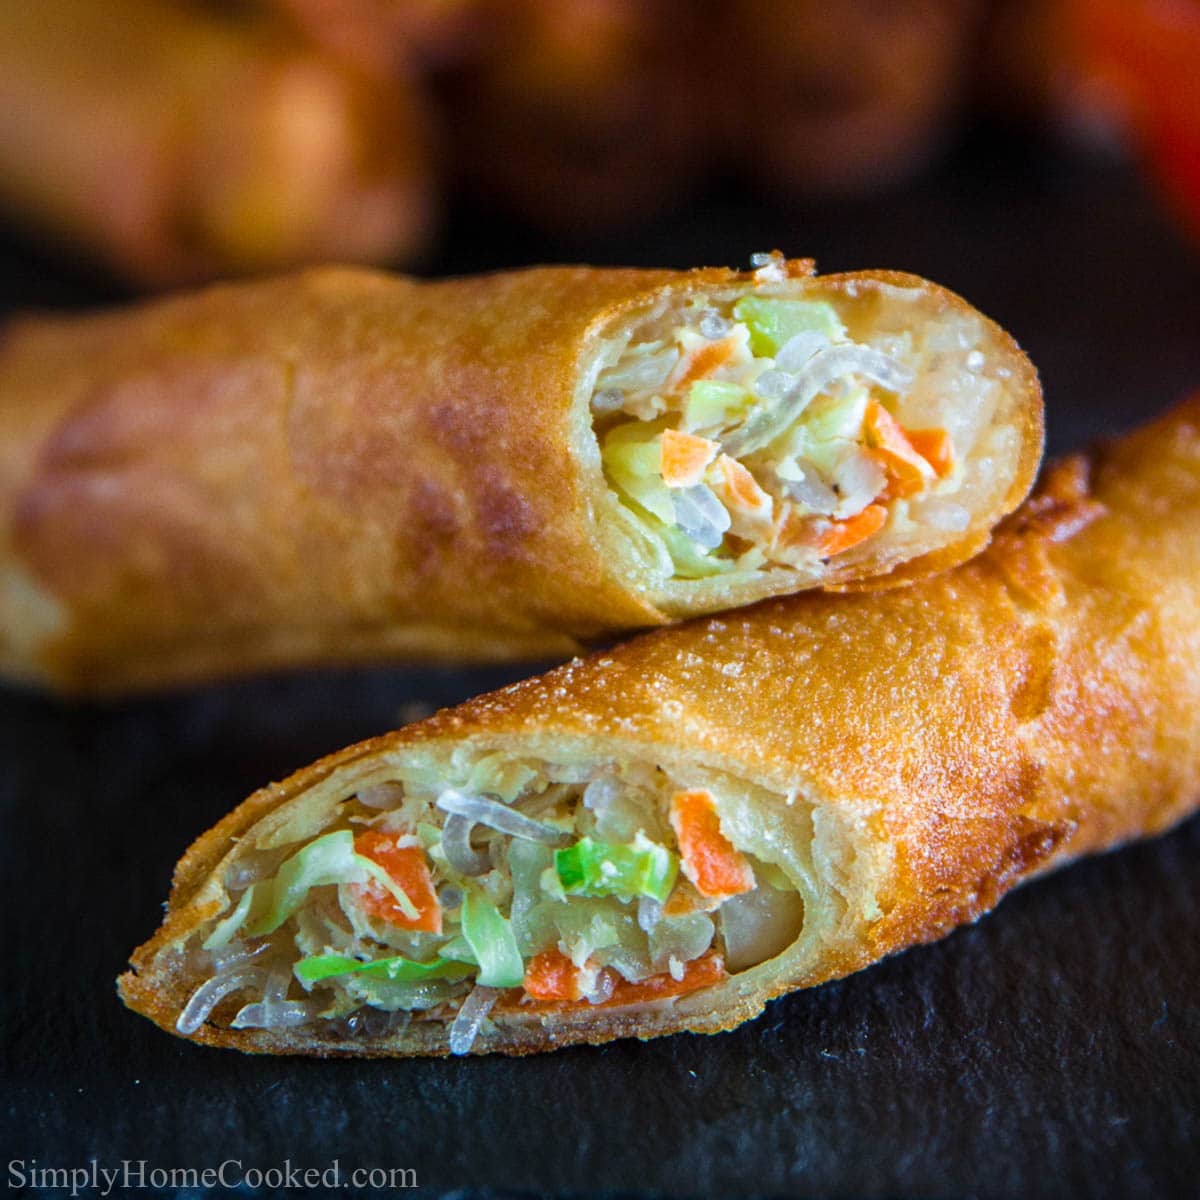 Spring Roll vs. Egg Roll: What's the Difference Between the Two?